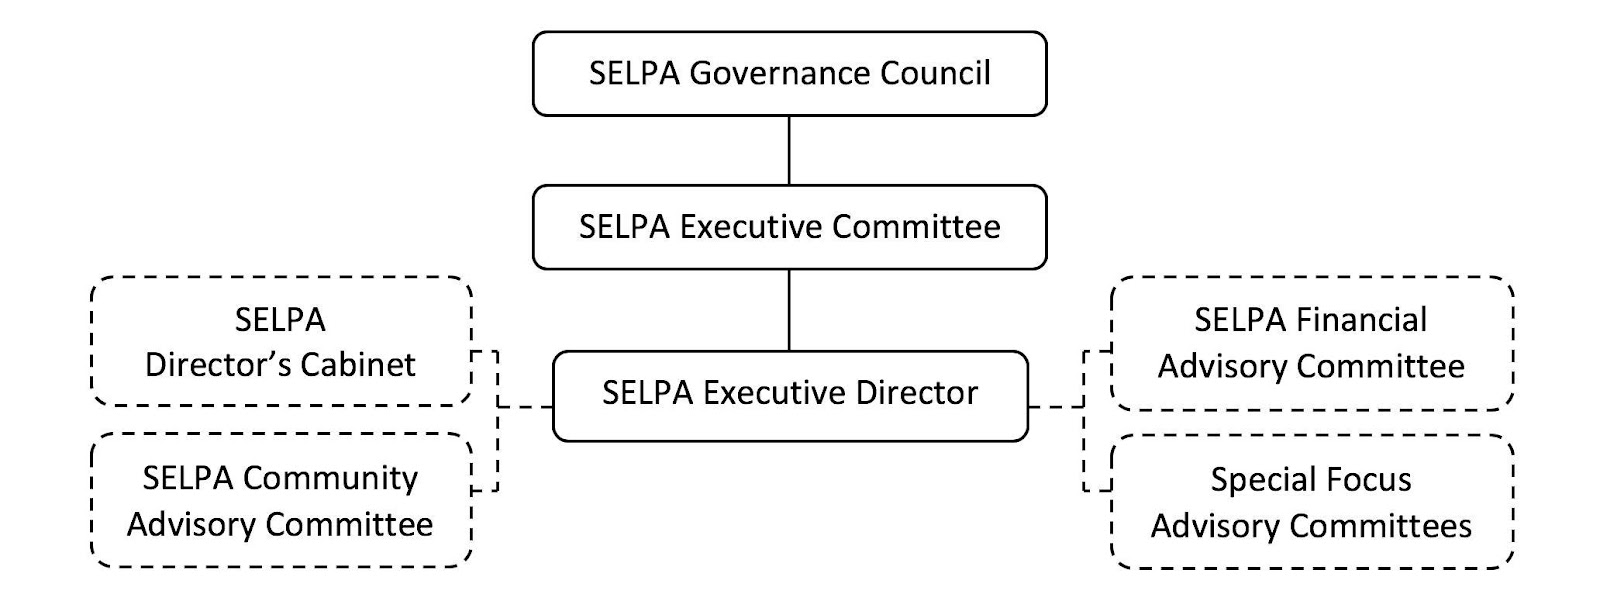 SELPA Governance Structure